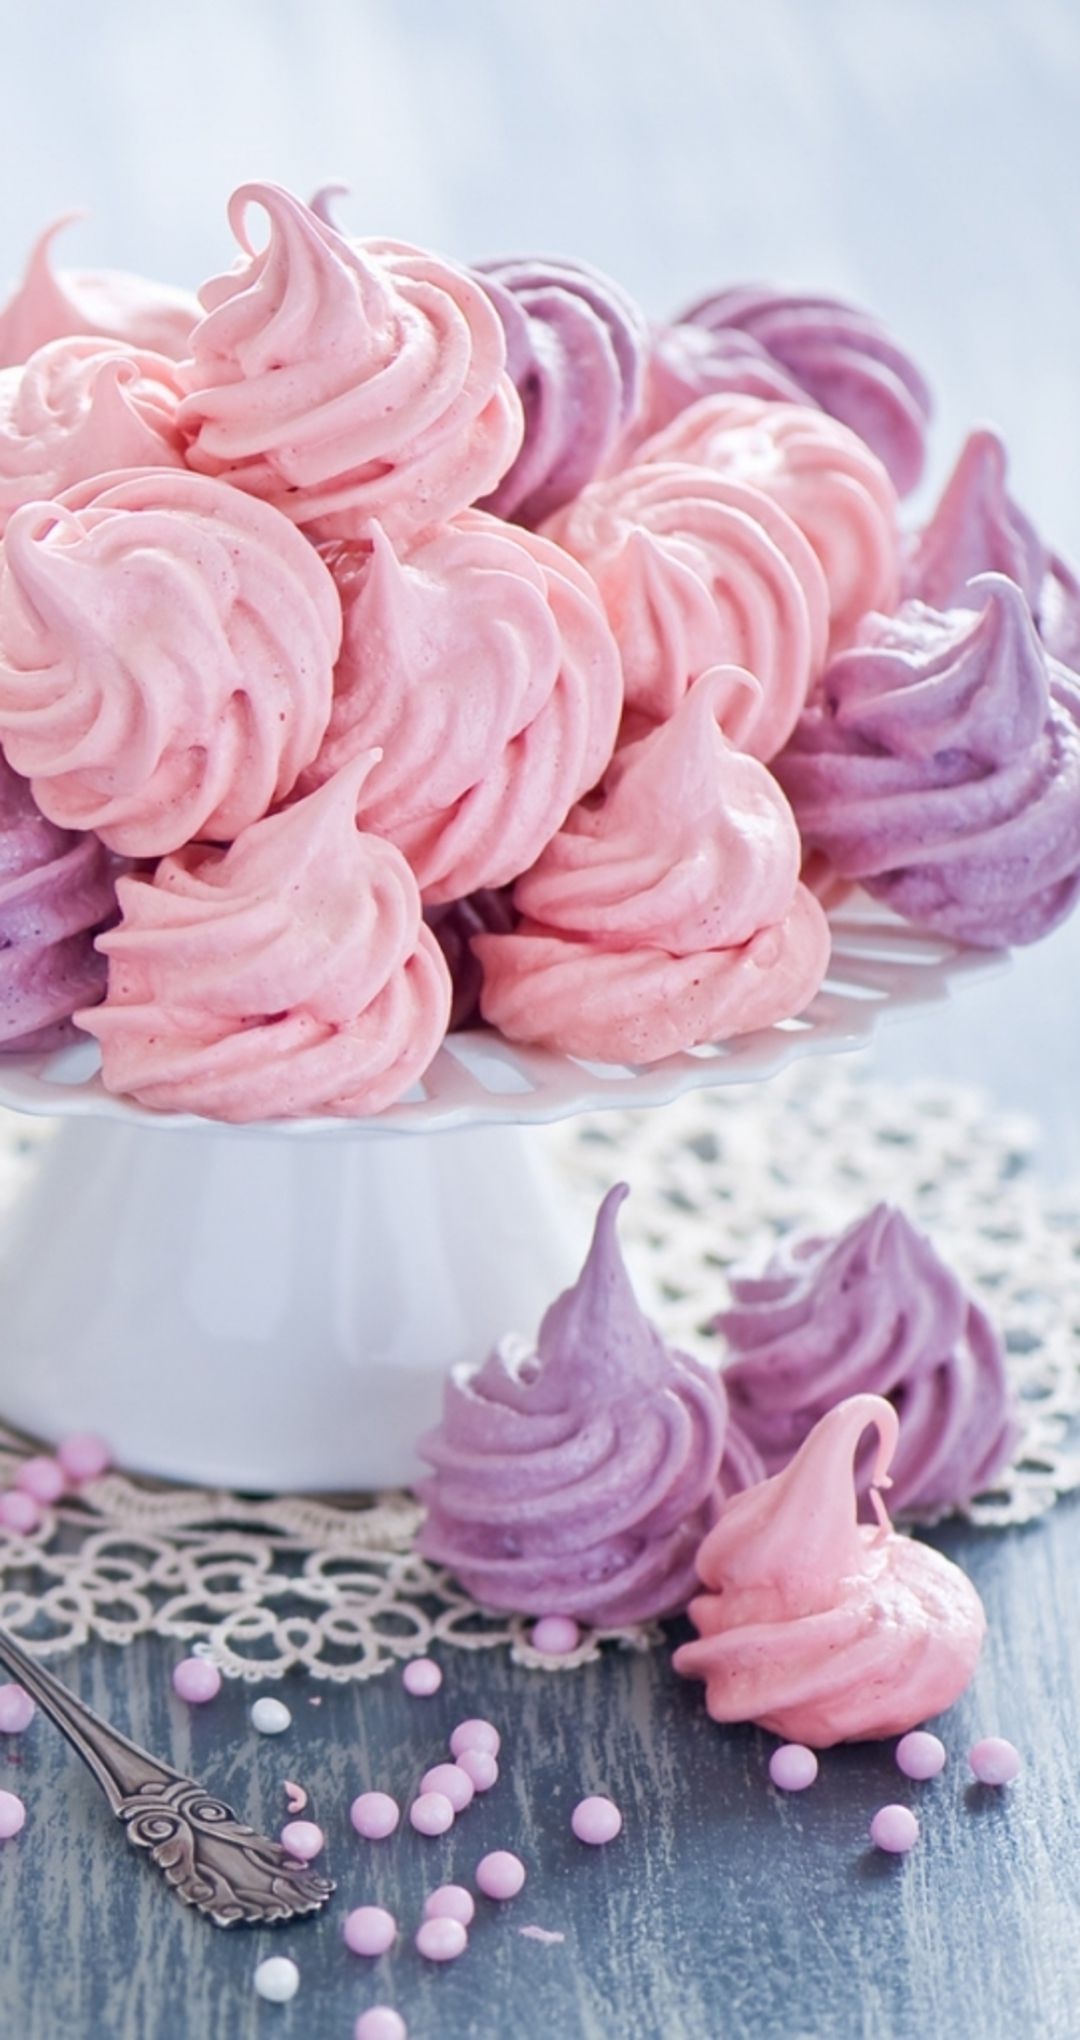 Meringue: Made by beating egg whites to firm peaks, then slowly whisking in hot sugar syrup. 1080x2040 HD Wallpaper.